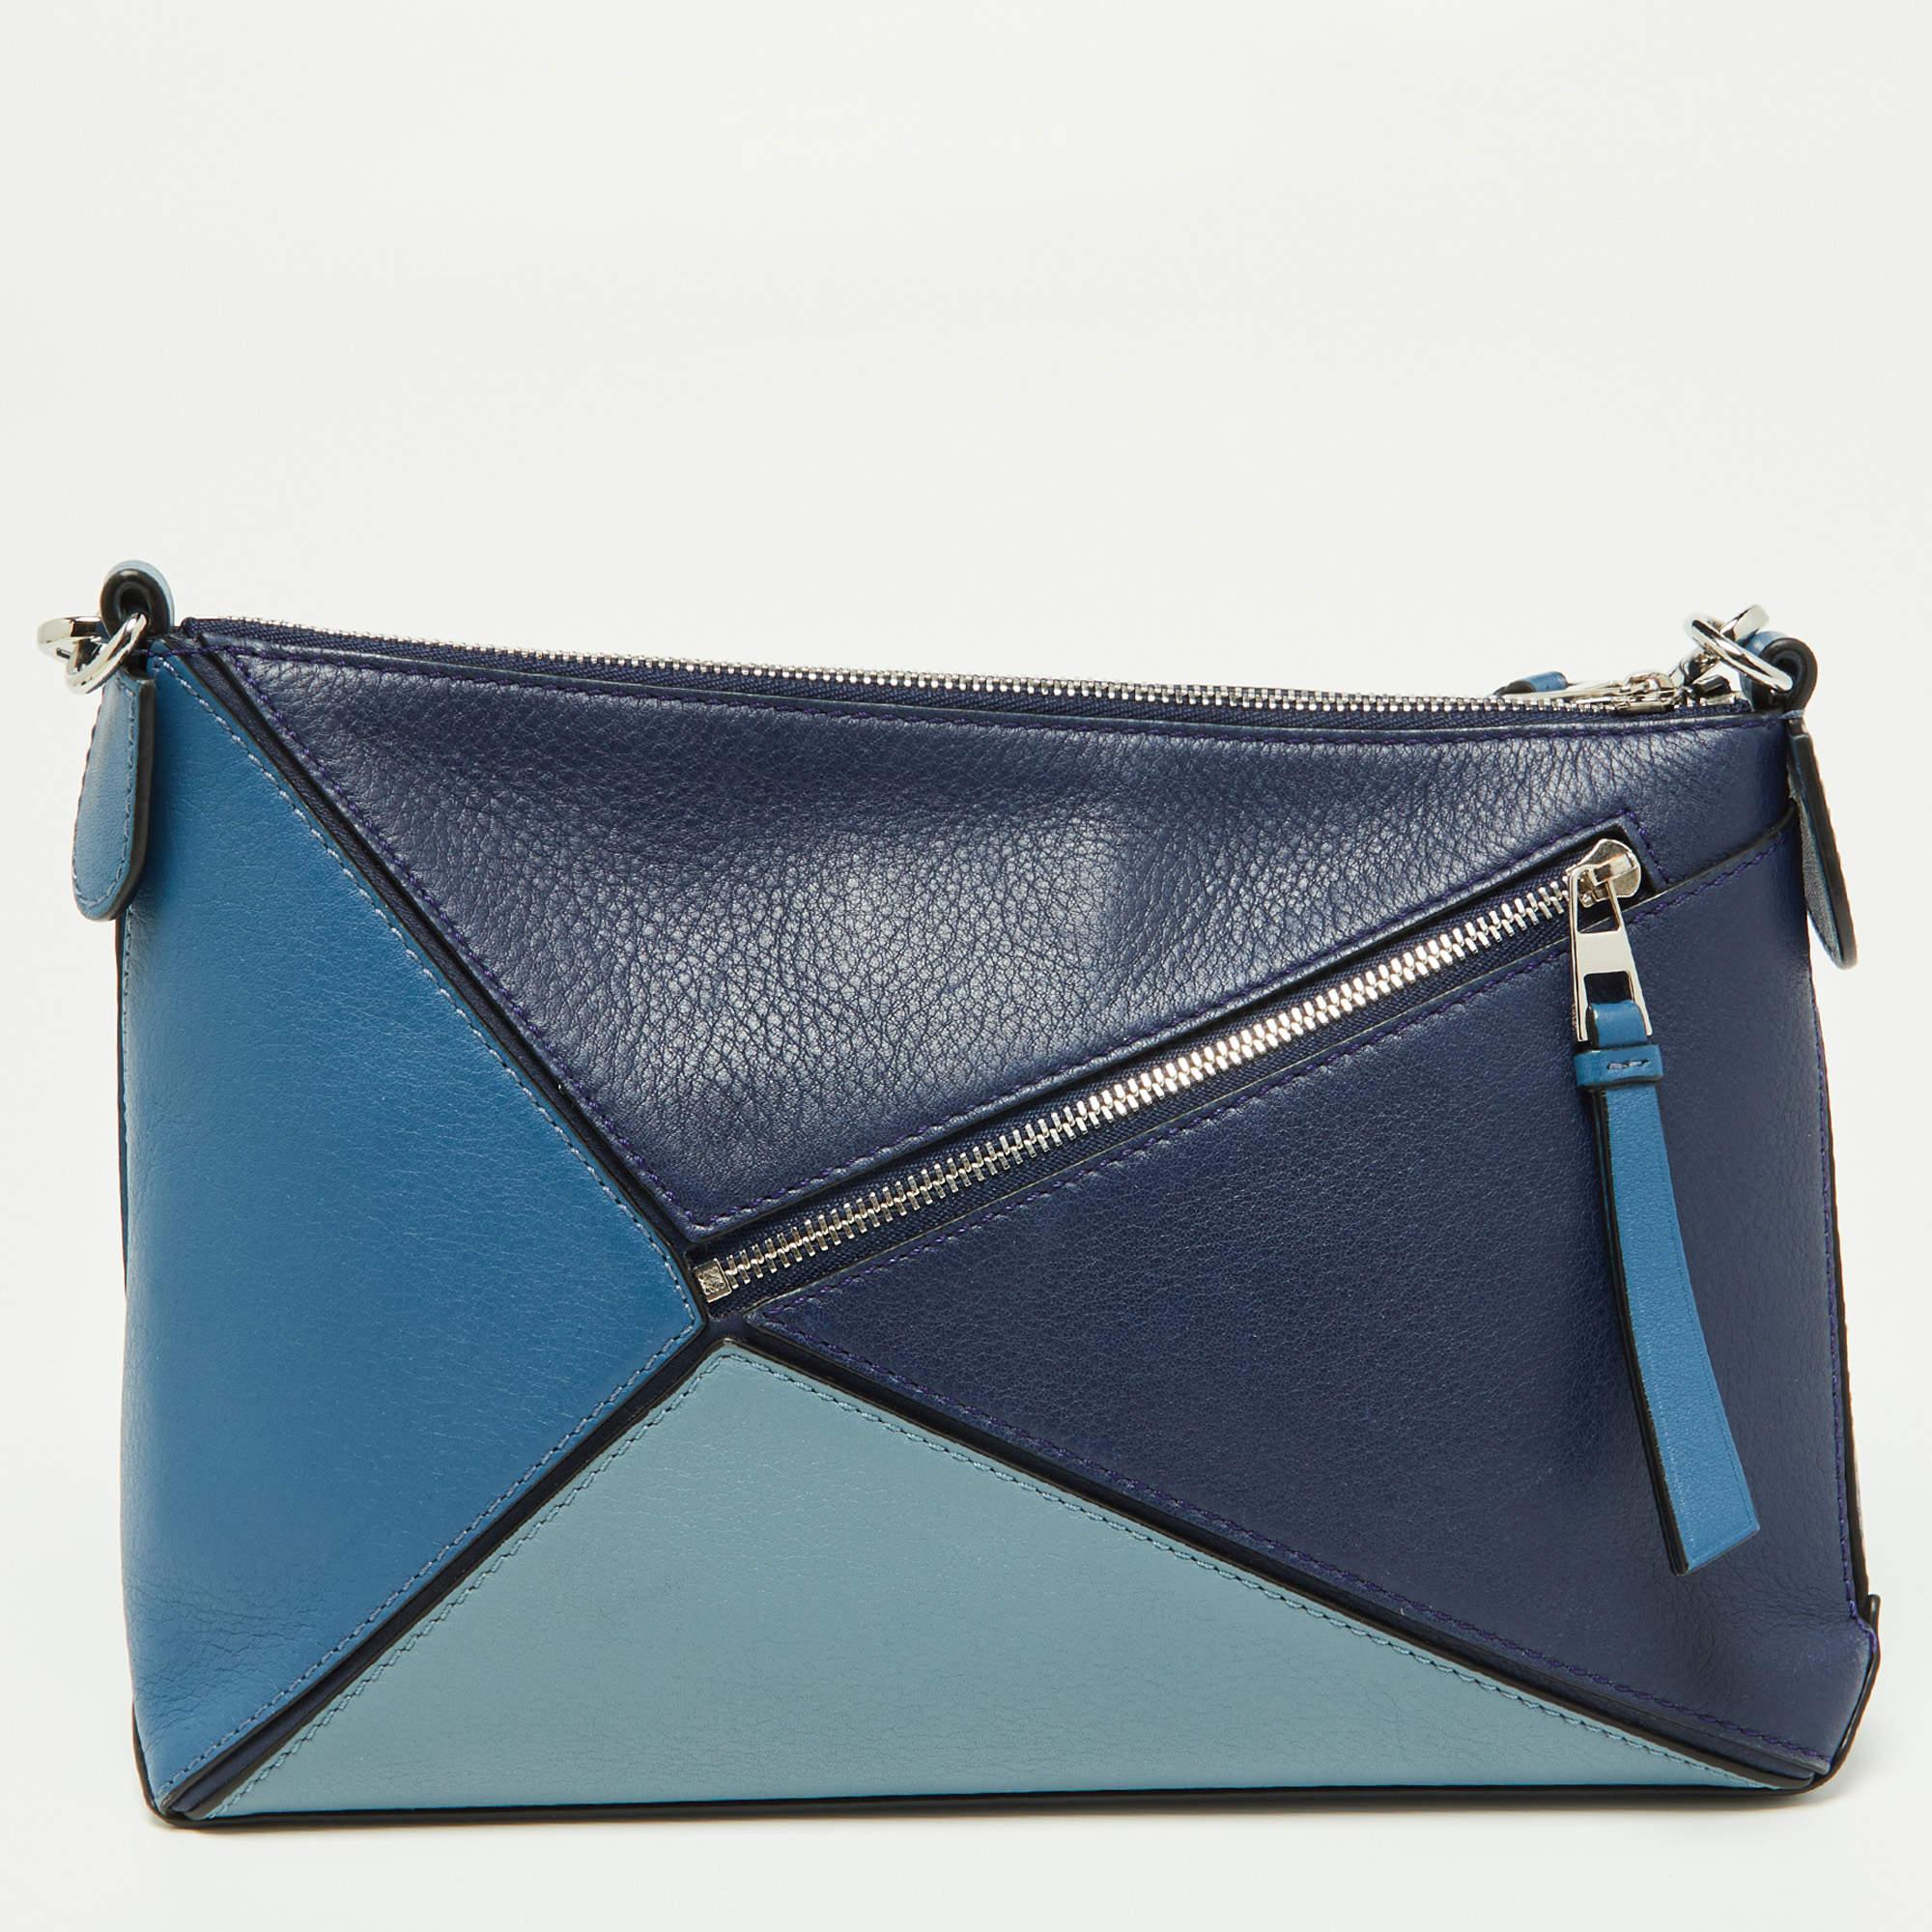 The Loewe Puzzle pochette bag is a stylish and compact accessory. Crafted from high-quality leather, it features a unique puzzle-like design in varying shades of blue. The bag is perfect for carrying essentials and exudes a modern and sophisticated